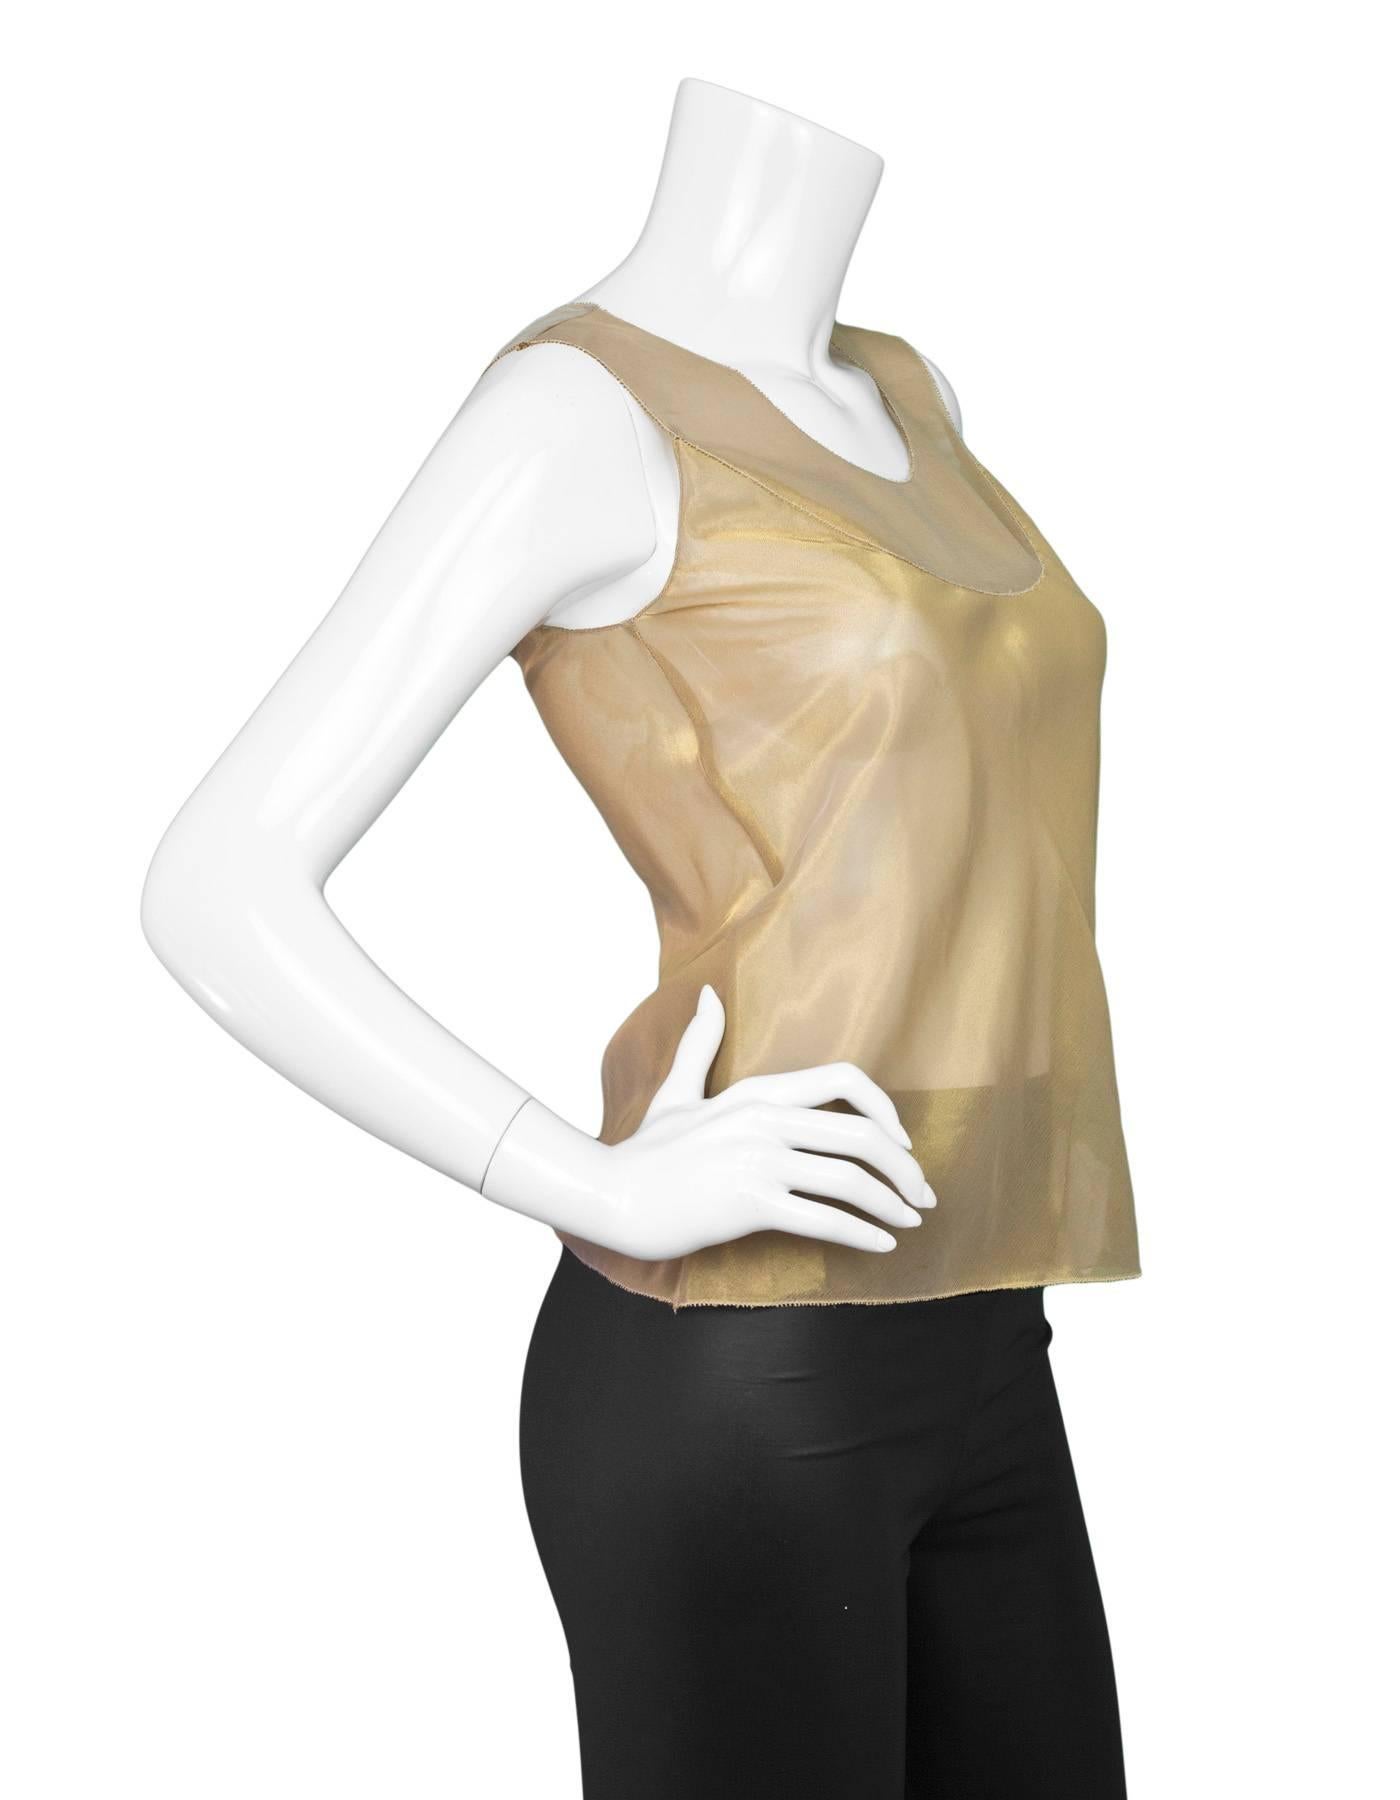 Vera Wang Metallic Gold Sleeveless Top 

Color: Metallic gold
Composition: Not given- believed to be a silk blend
Lining: None
Closure/Opening: Pull over
Exterior Pockets: None
Interior Pockets: None
Overall Condition: Excellent pre-owned condition